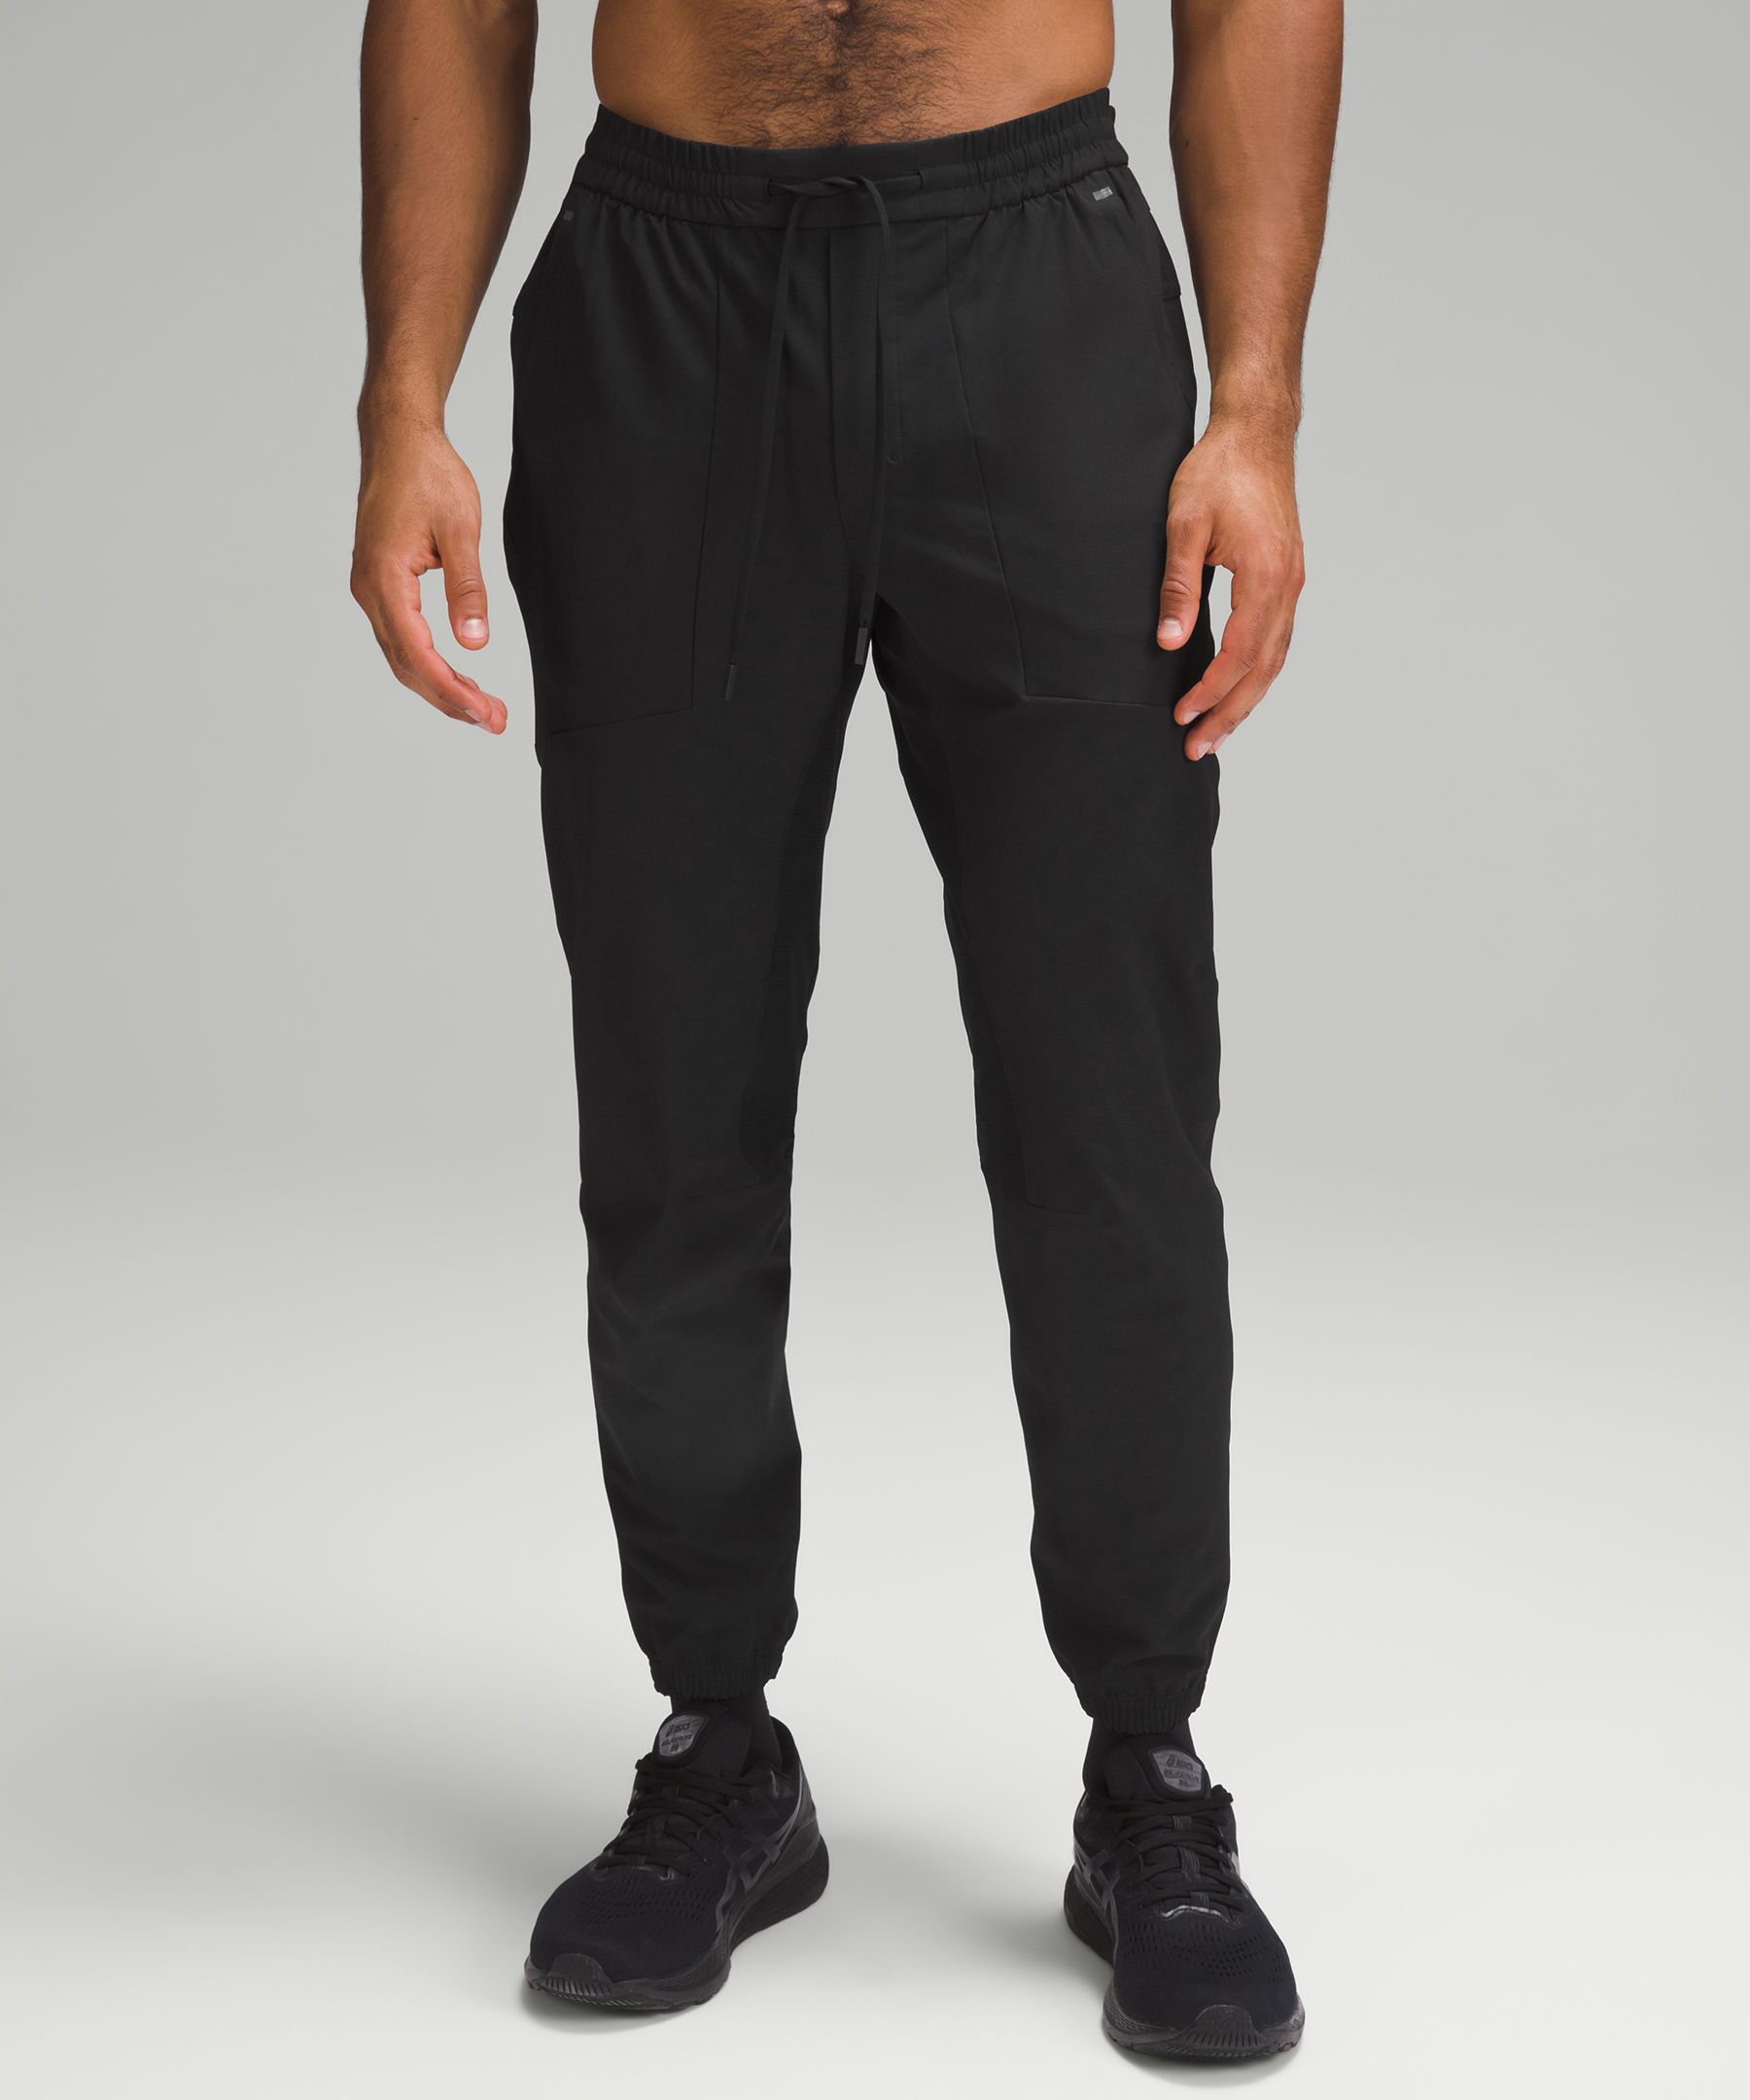 These Versatile $30 Joggers Are 'Comparable to Lululemon